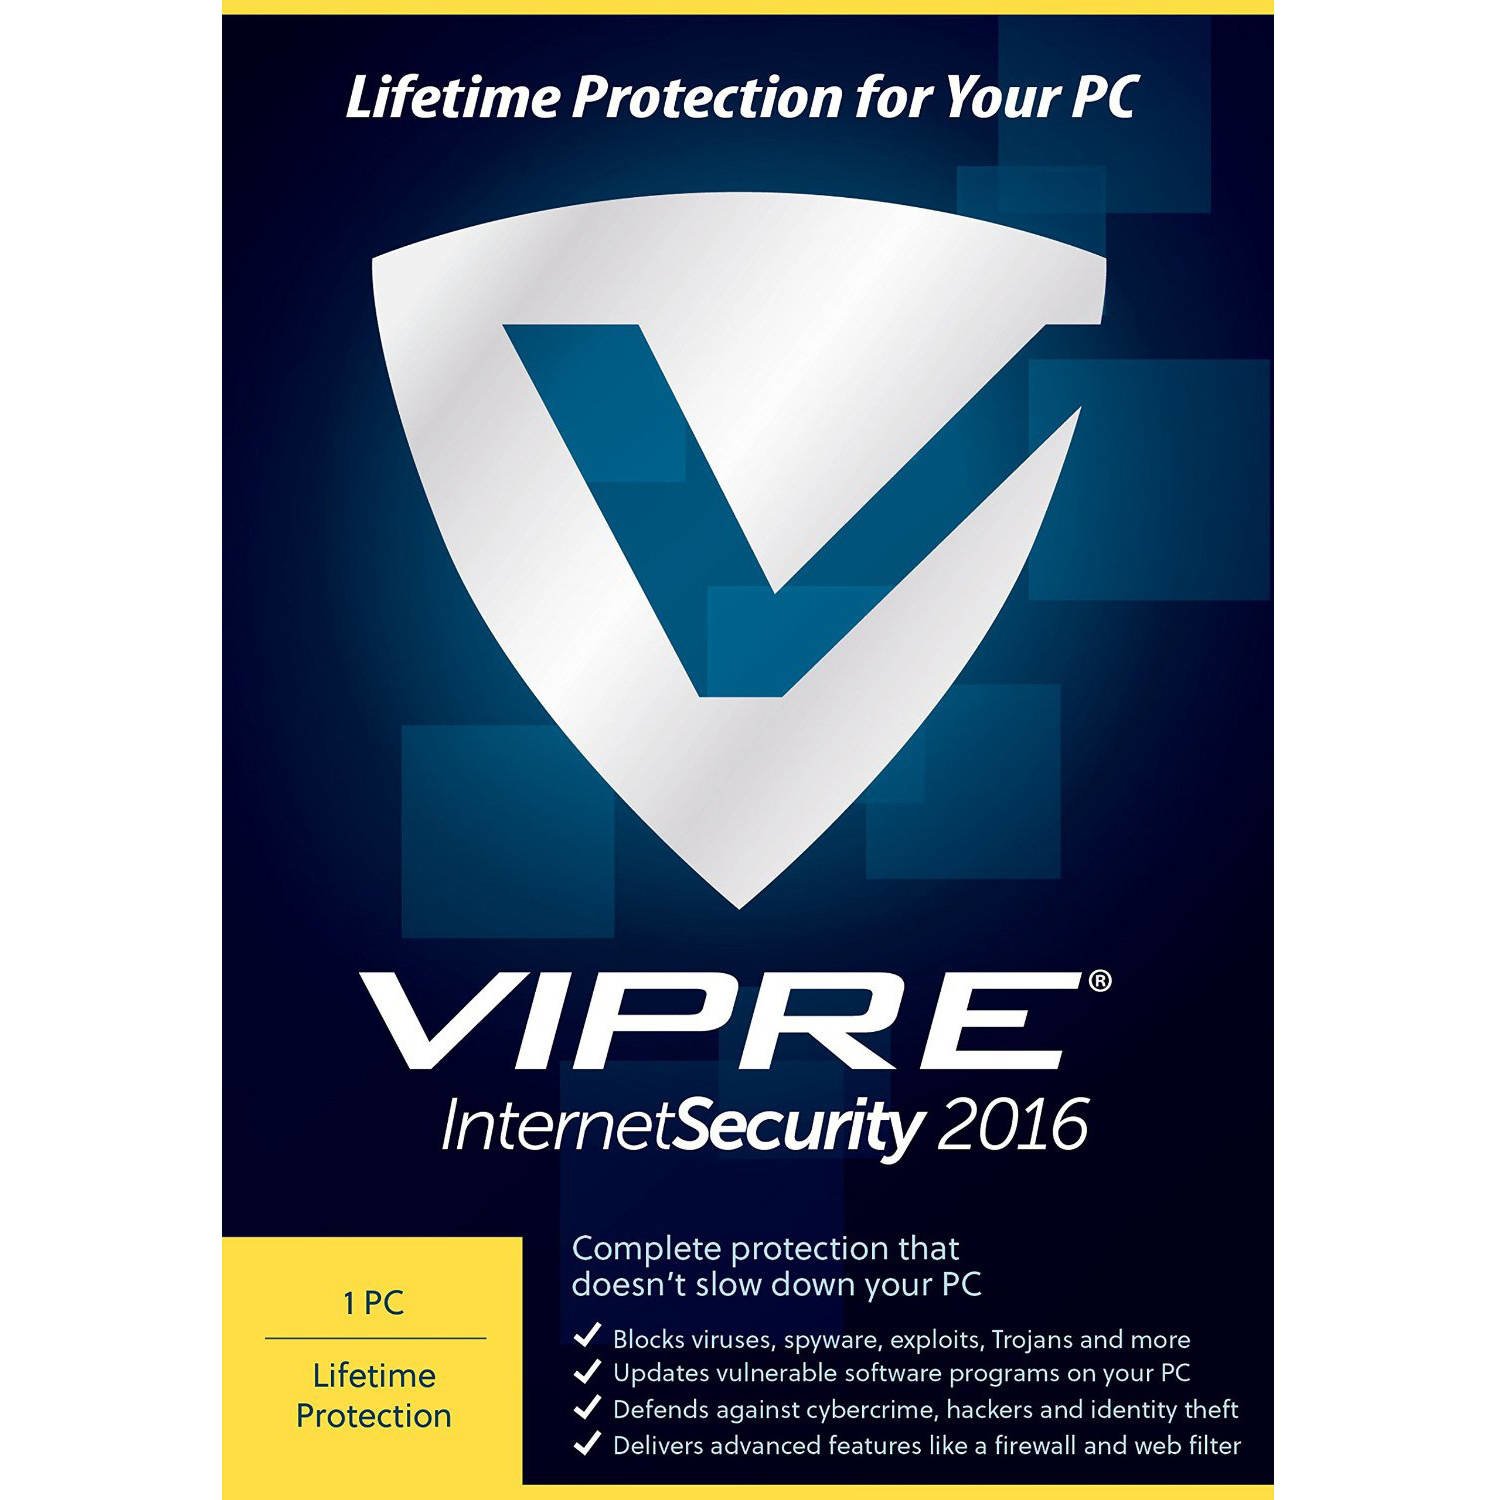 vipre advanced security for business features